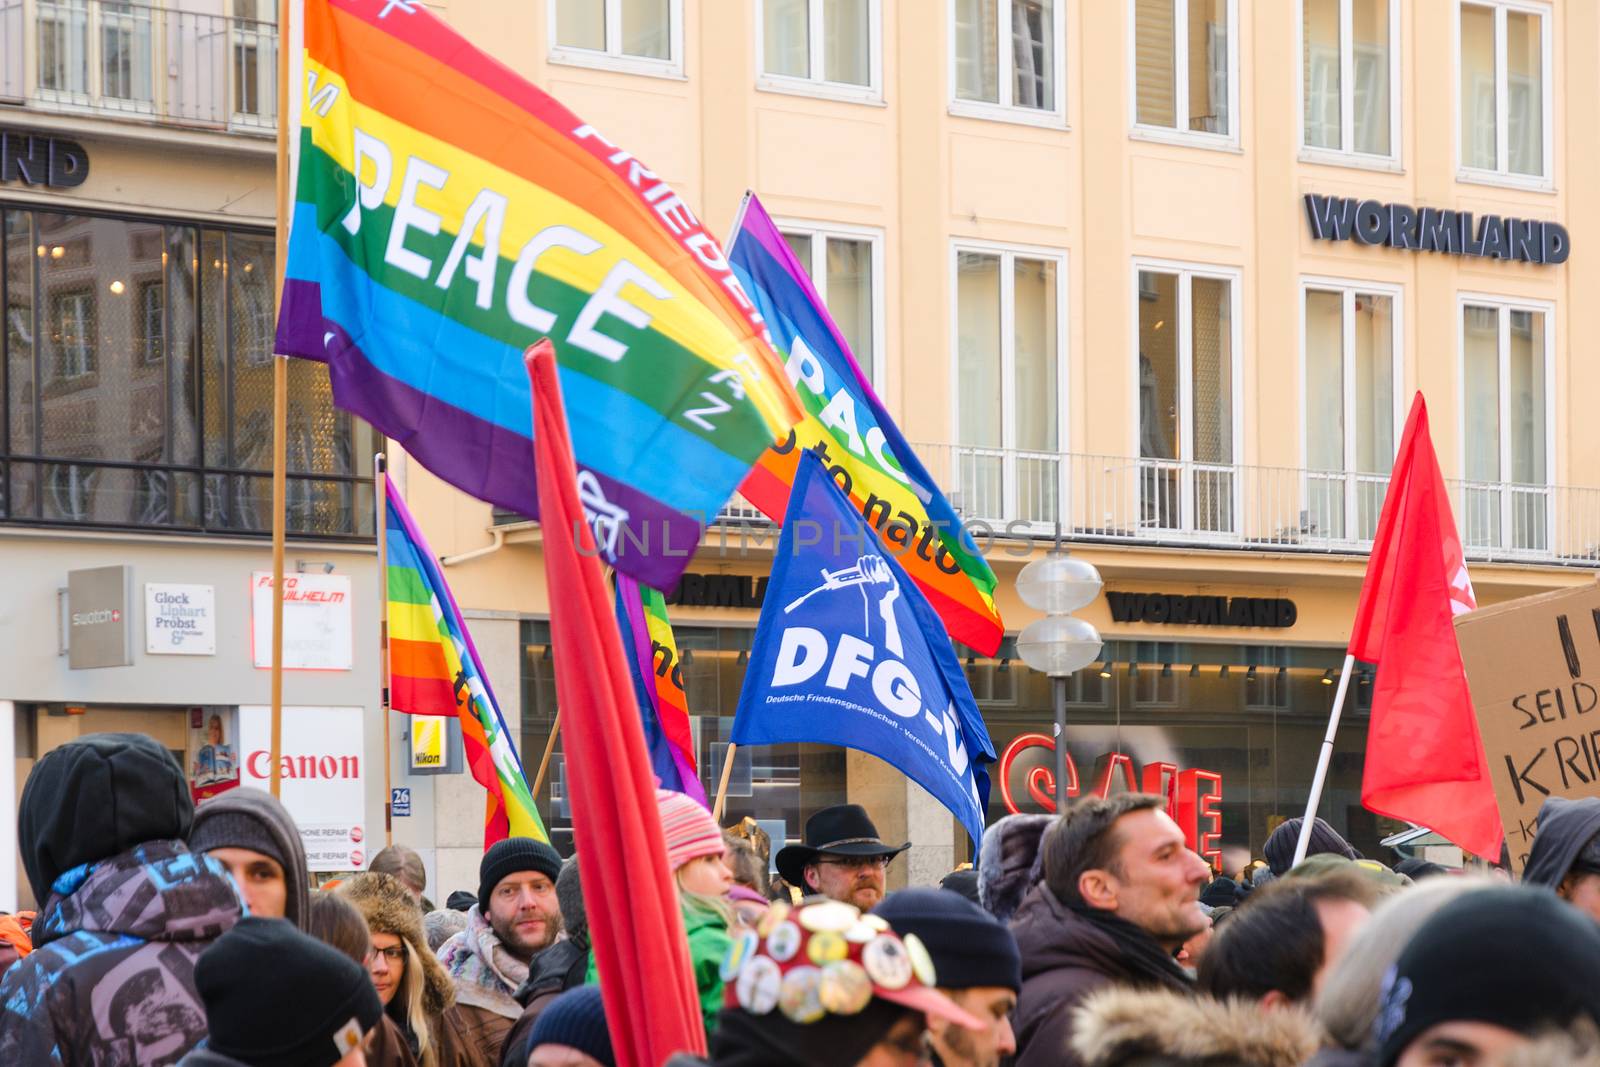 Munich, Germany - February 7, 2015: European peaceful march with flags, placards and banners on central street